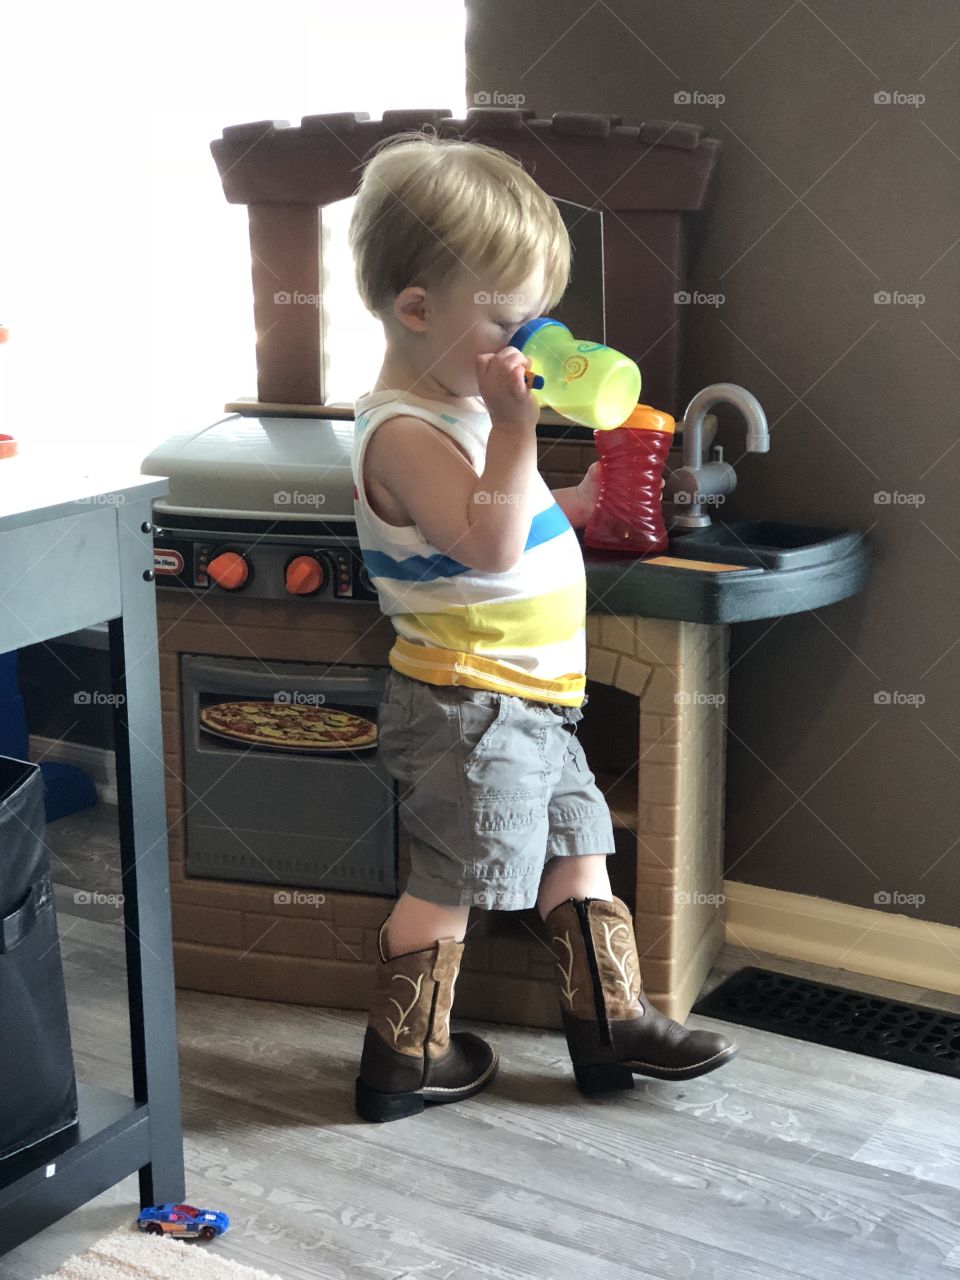 My son and his favorite boots, two drinks and working the grill like a pro!